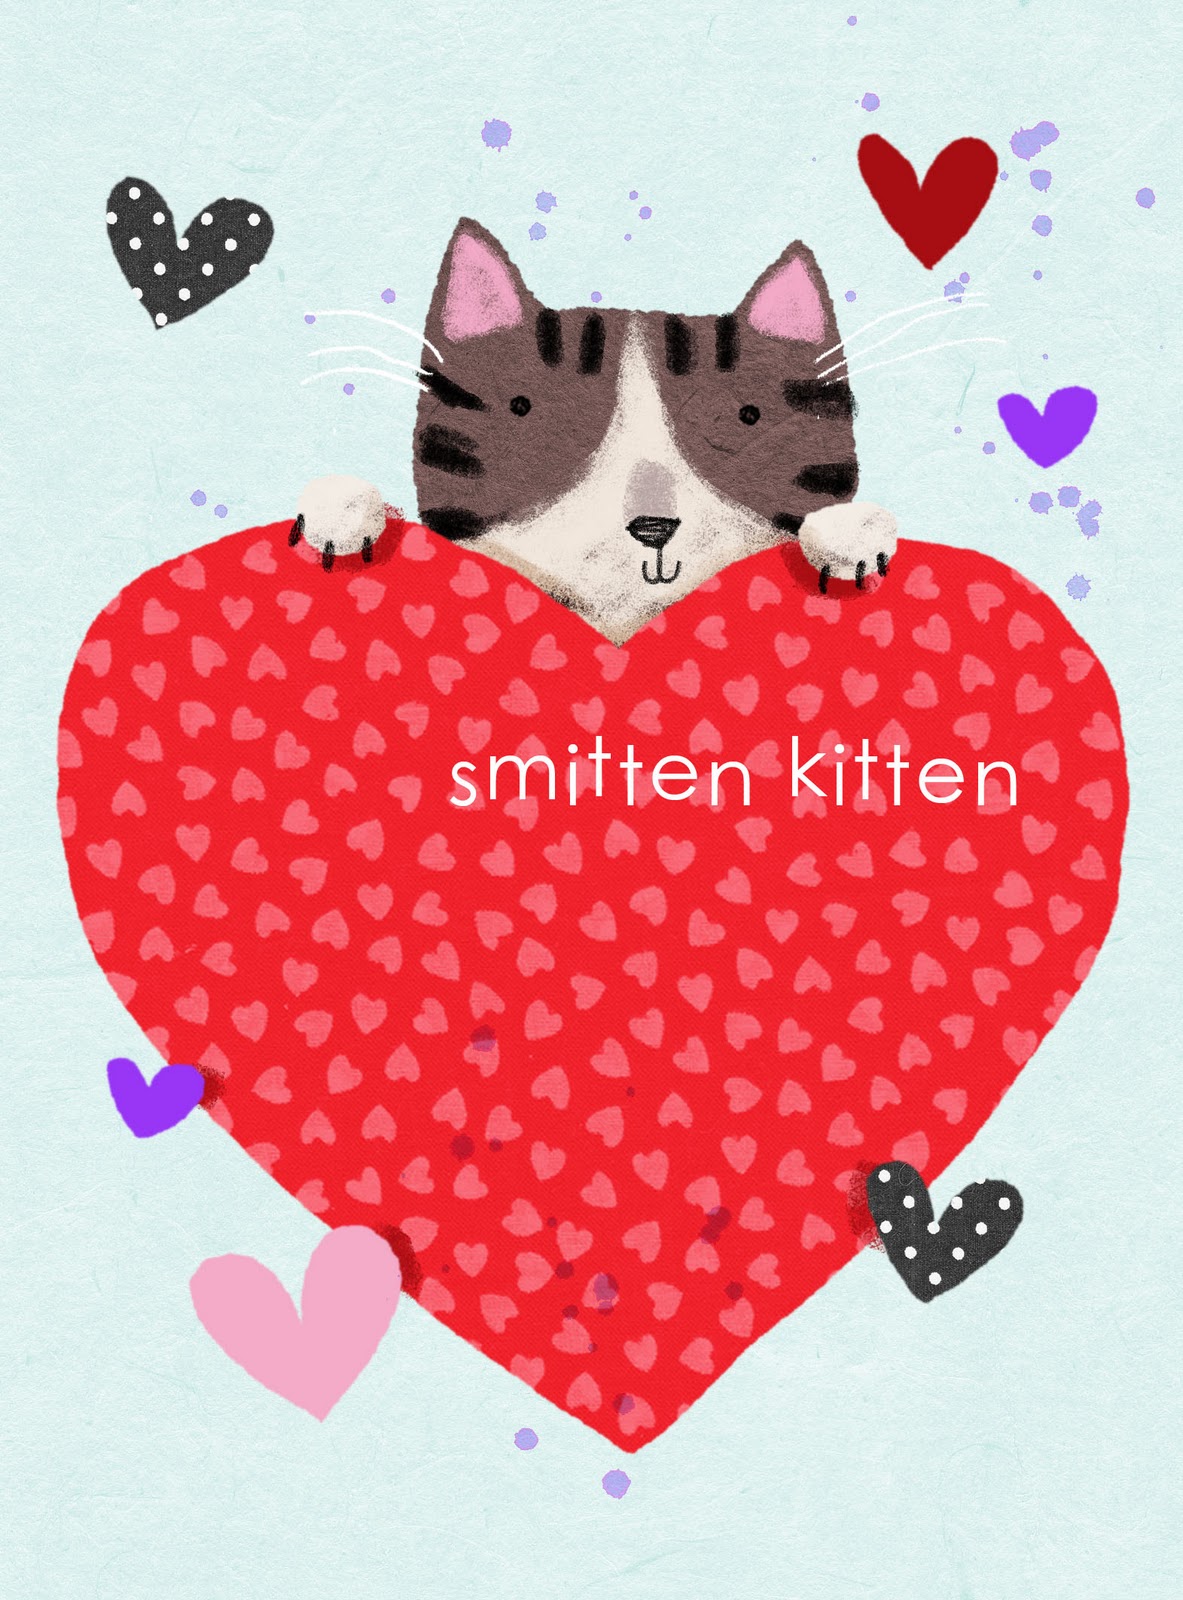 We Love to Illustrate: FREE Printable Valentine's Day Cards For Kids!1183 x 1600